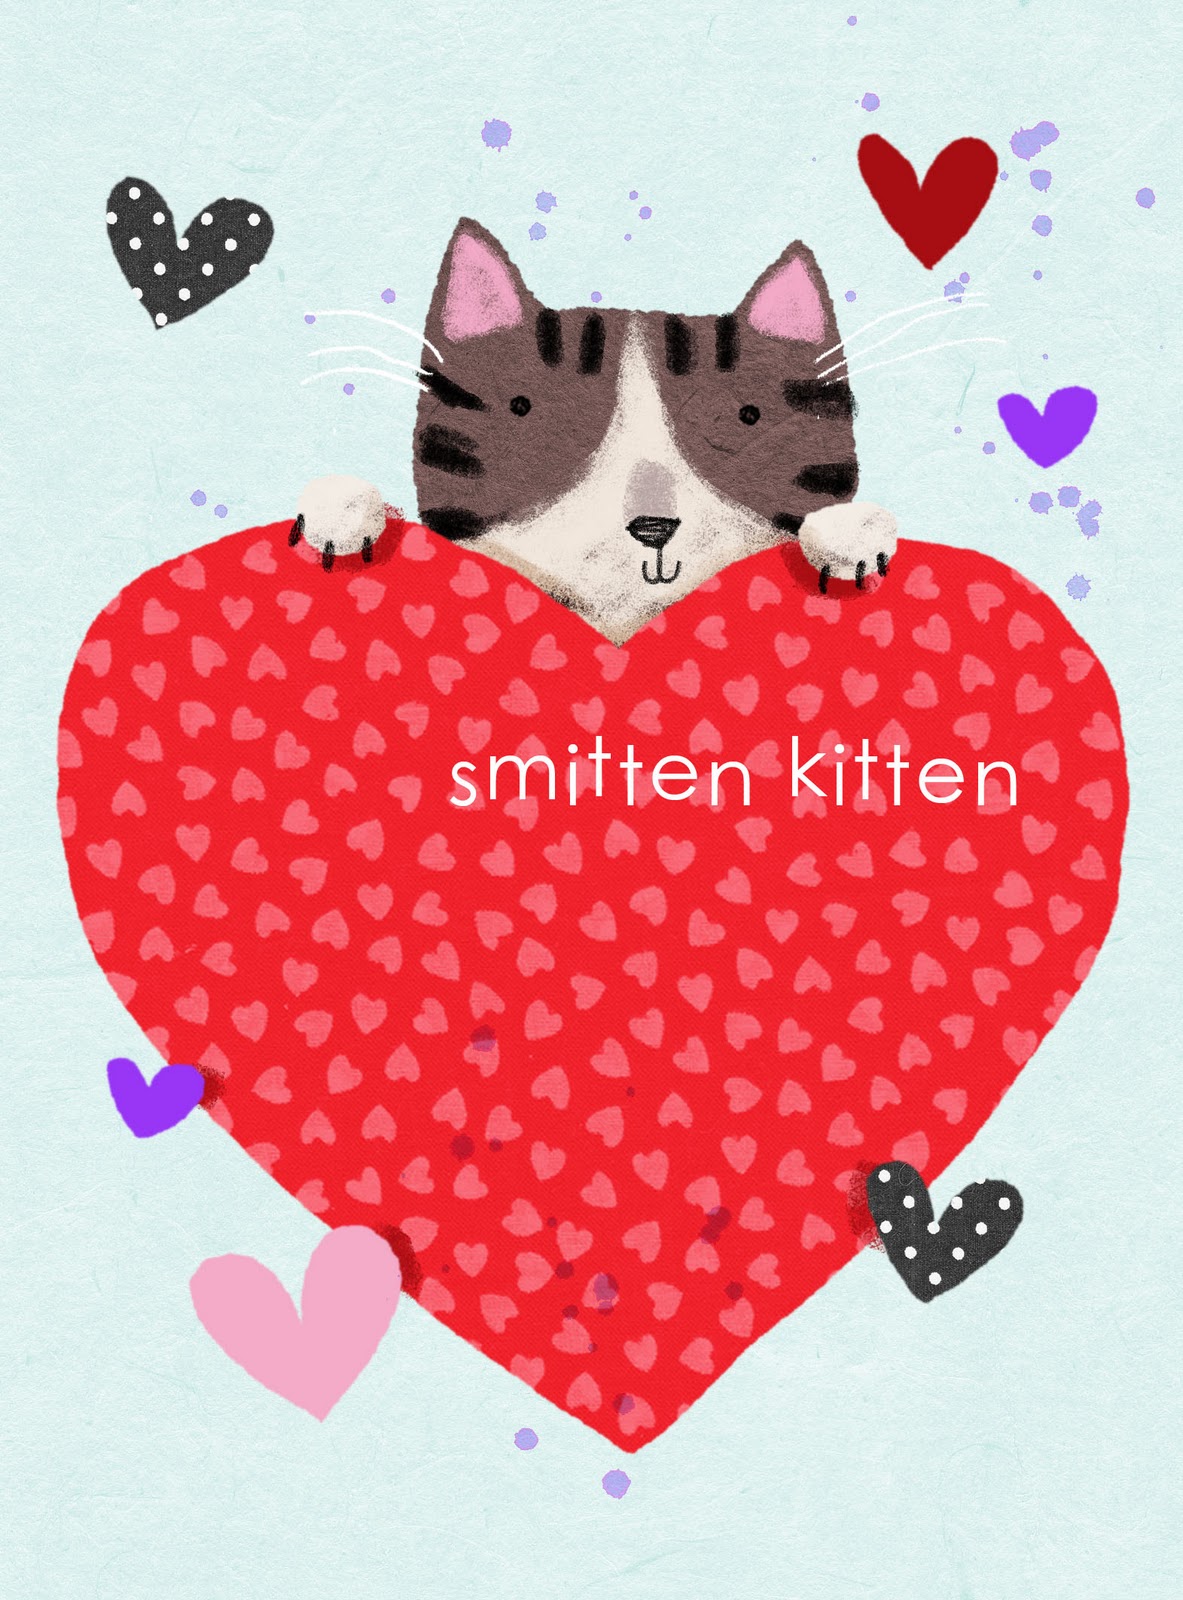 We Love to Illustrate: FREE Printable Valentine's Day Cards For Kids!1183 x 1600